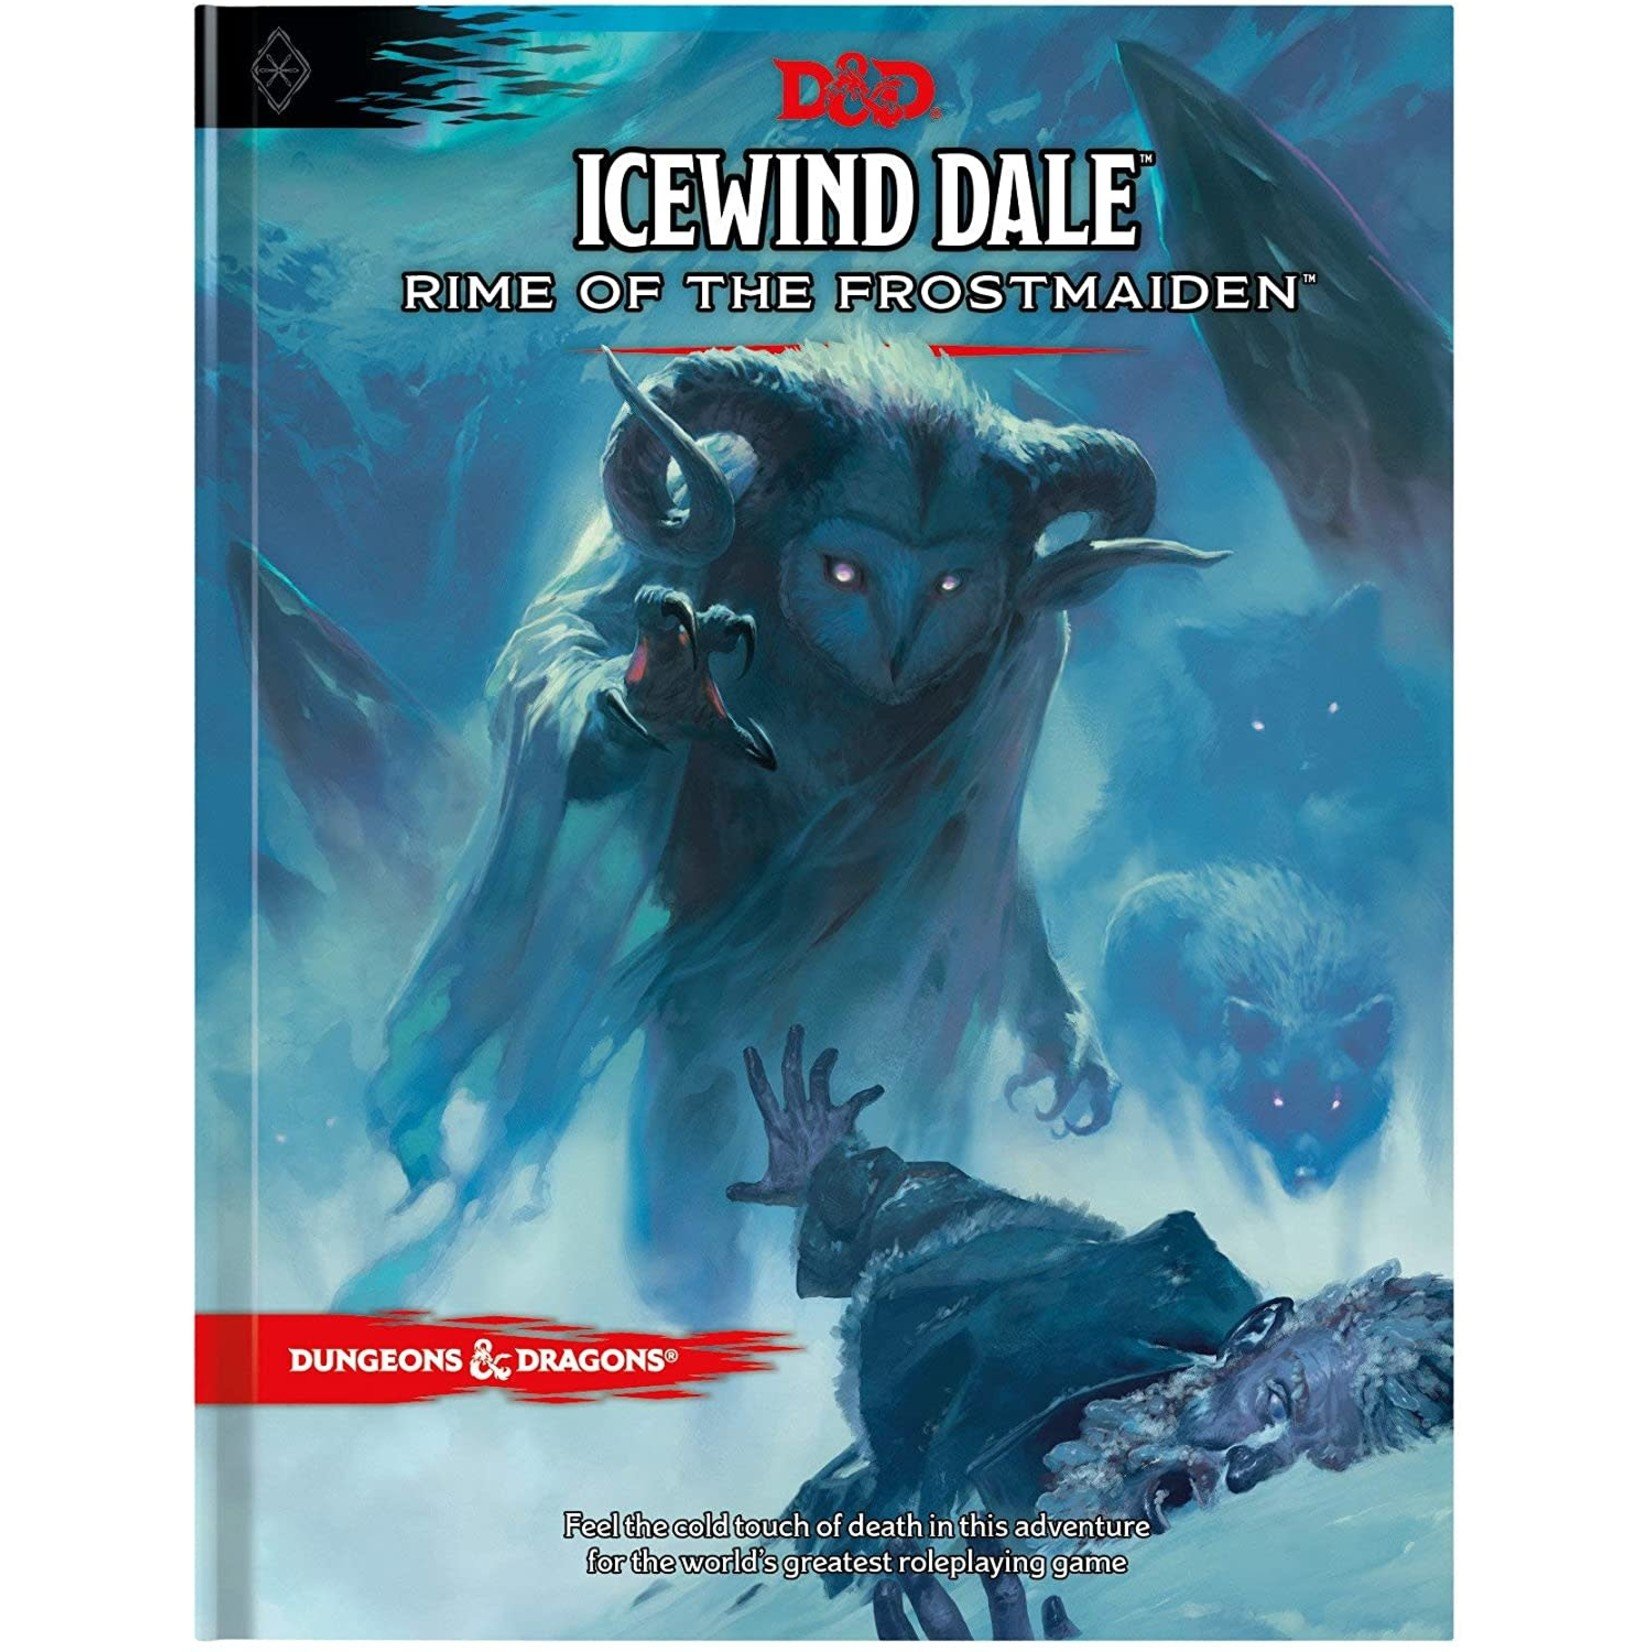 Wizards of the Coast 5E D&D Campaign Book: Icewind Dale: Rime of the Frost